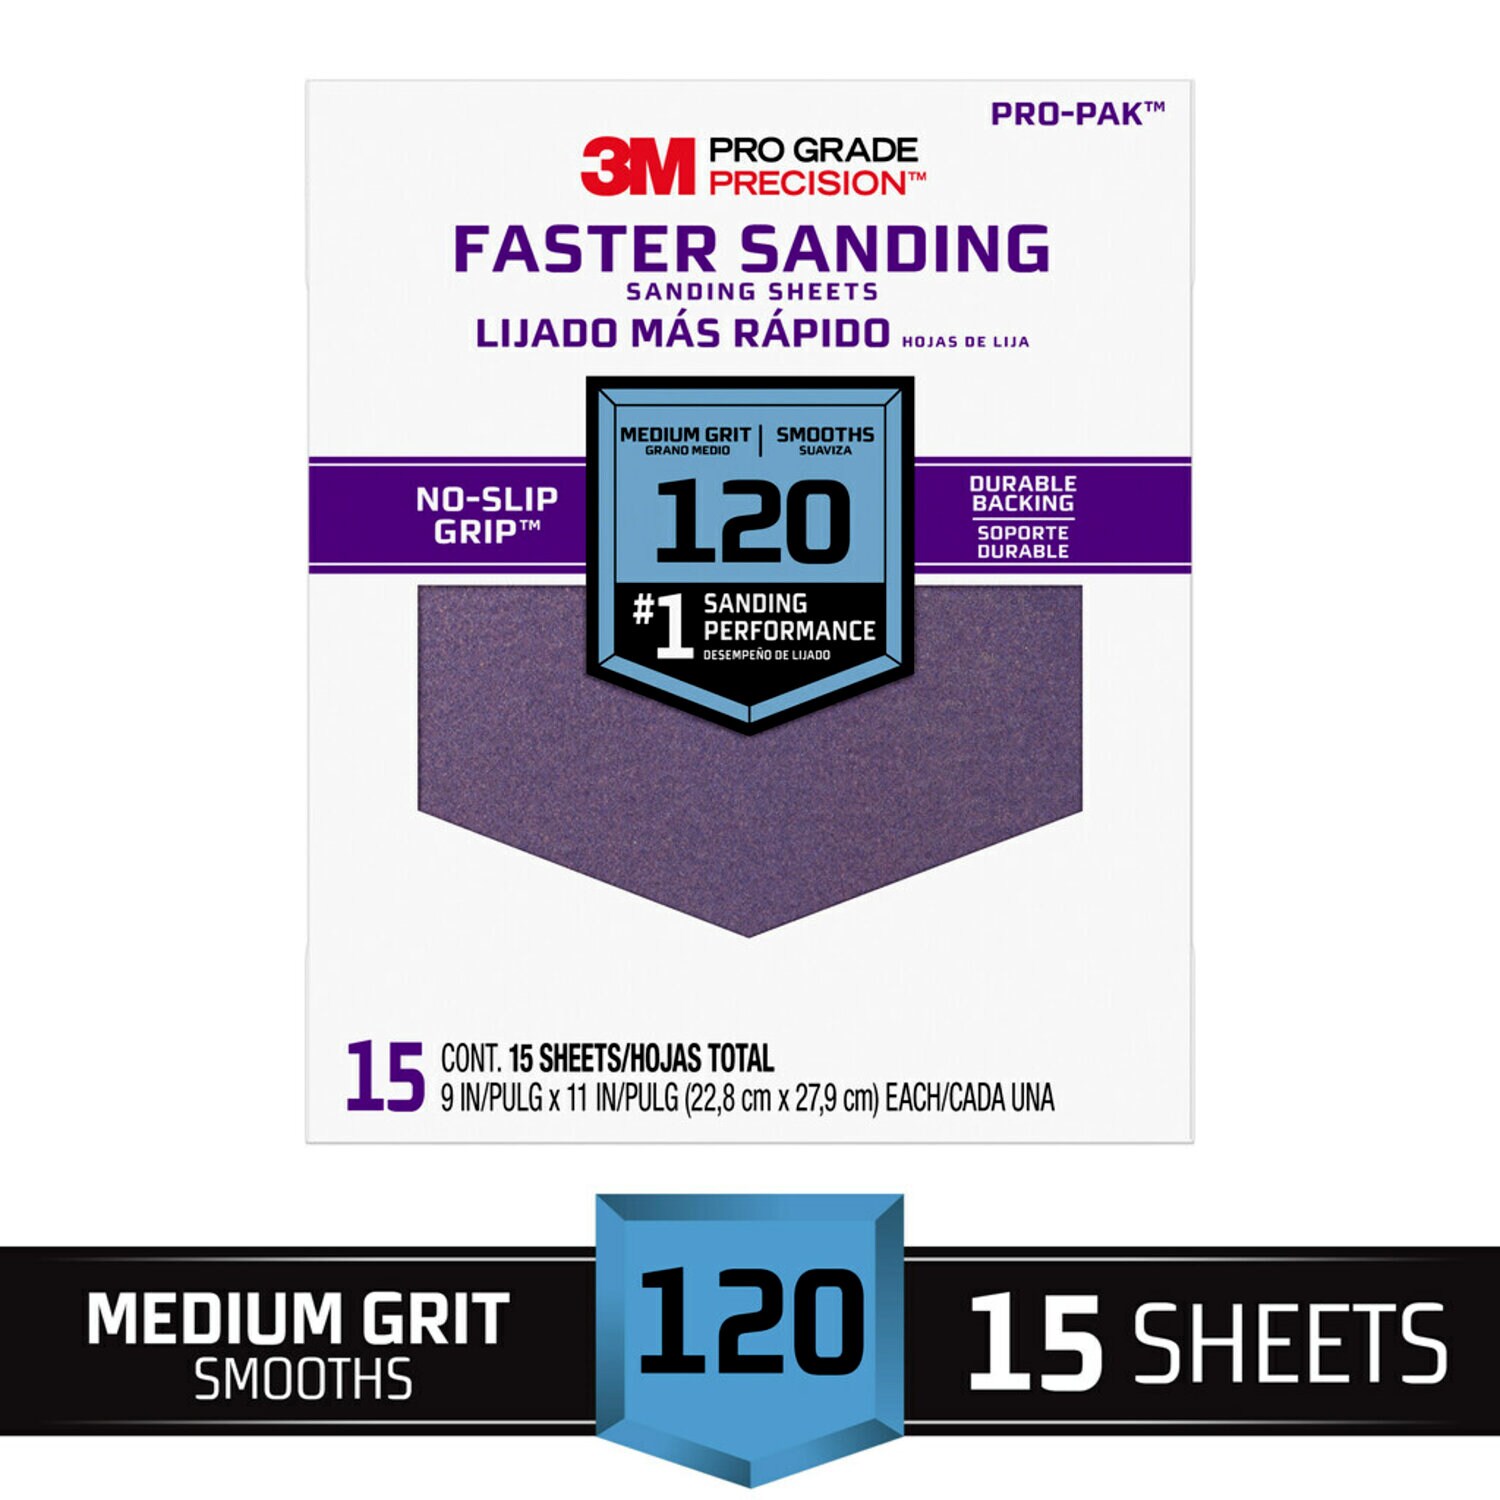 7100227526 - 3M Pro Grade Precision Faster Sanding Sanding Sheets 26120PGP-4, 9 in x 11 in, 120 grit, Medium, 4/pk